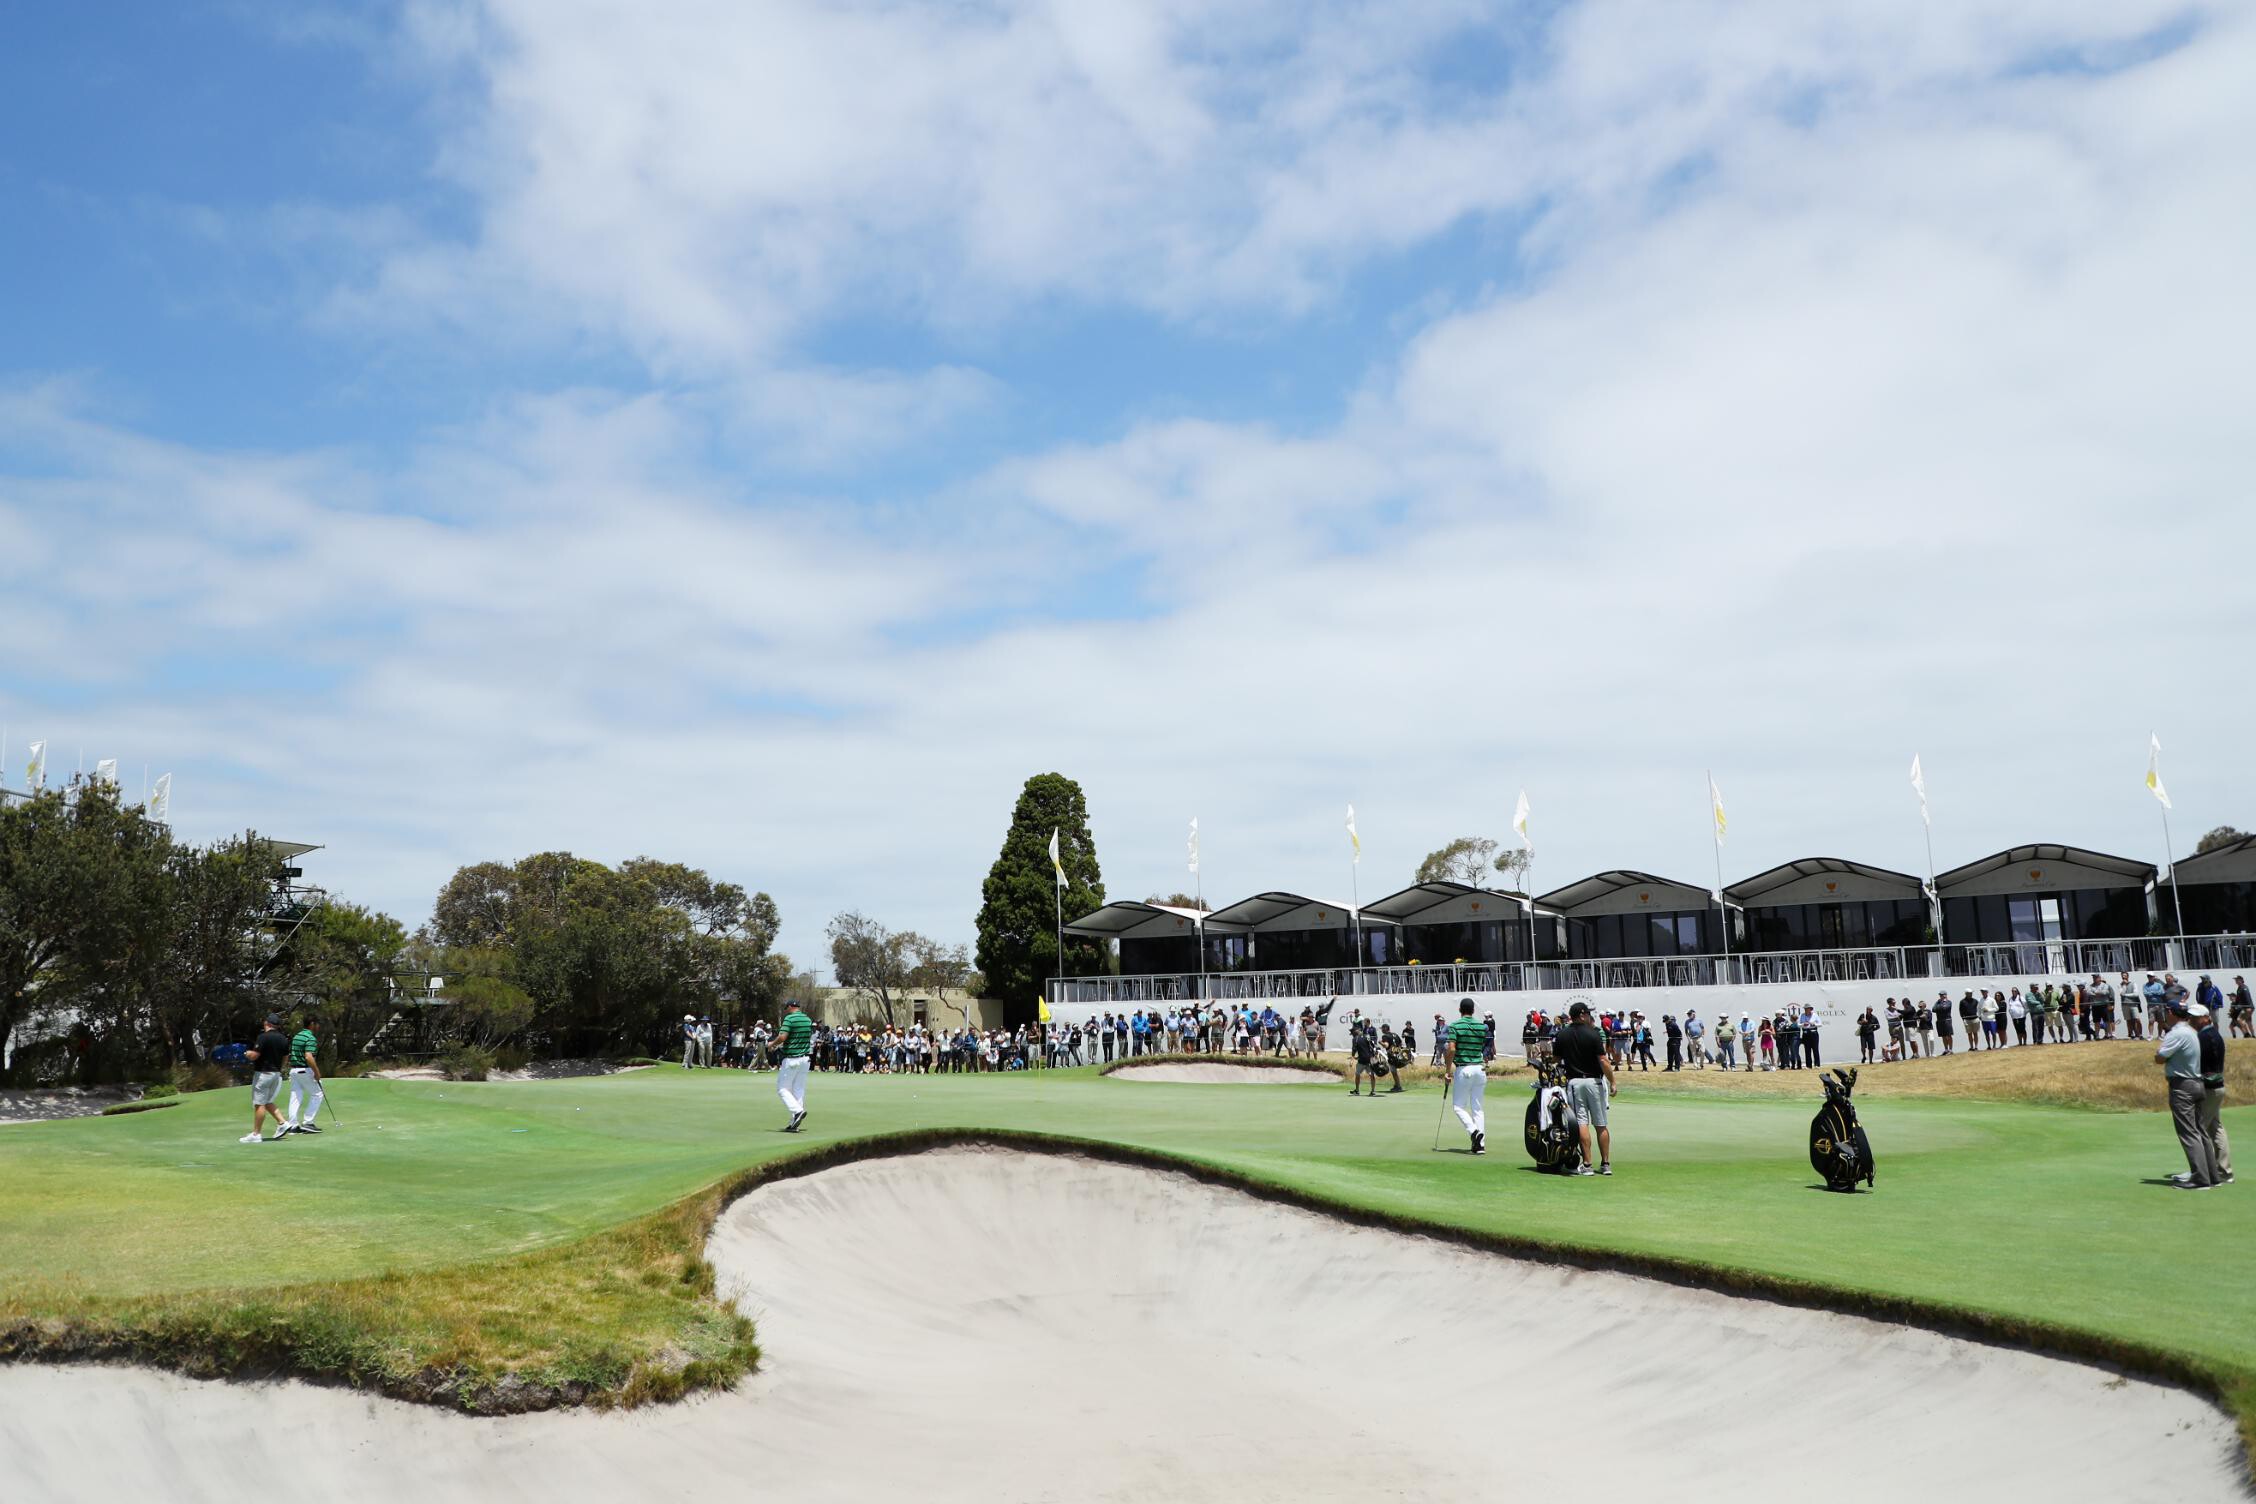 <i>Warren Little/Getty Images AsiaPac/Getty Images</i><br/>A general view of the Royal Melbourne Golf Course ahead of the 2019 Presidents Cup.